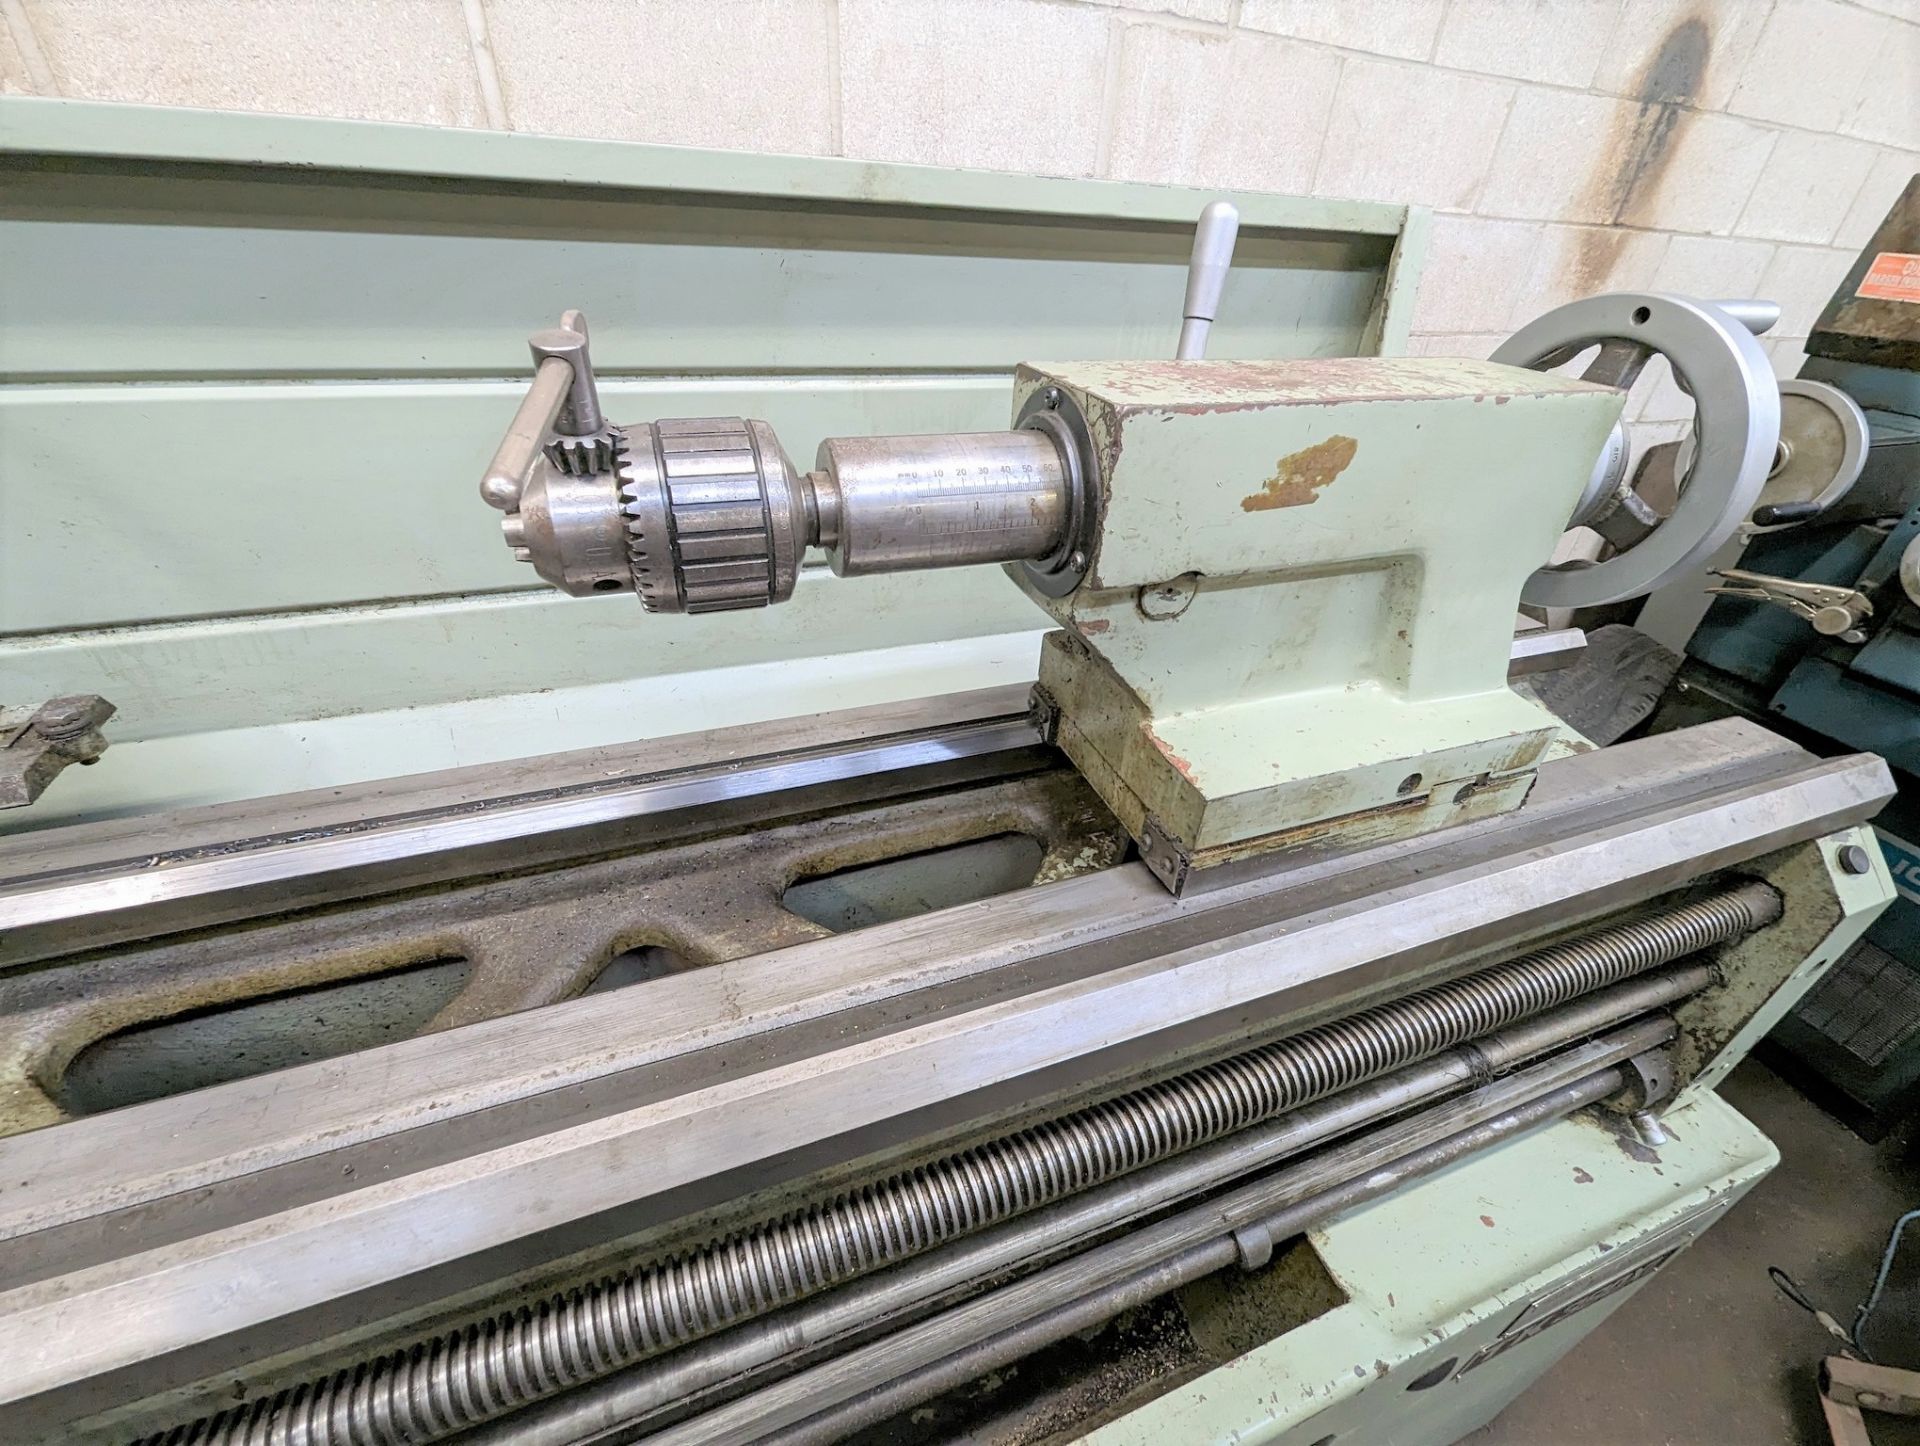 TAKANG TK 380XL ENGINE LATHE, 9” 3-JAW CHUCK, 18” SWING, 72” BED, 2.25” BORE, TAILSTOCK, TOOL - Image 6 of 18